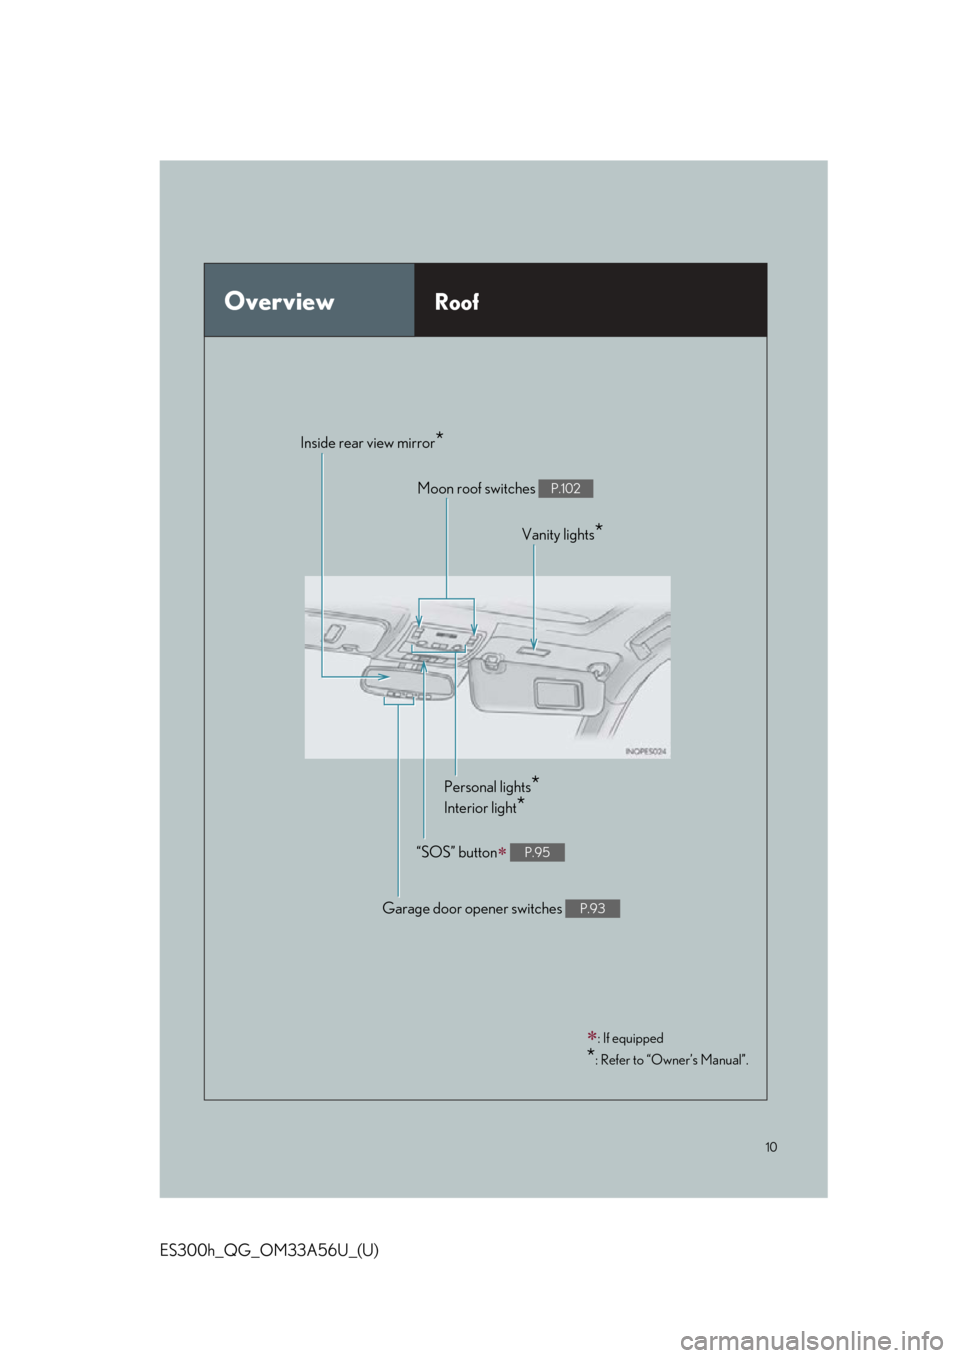 Lexus ES300h 2013  Phone Operation / Owners Manual Quick Guide (OM33A56U) 10
ES300h_QG_OM33A56U_(U)
OverviewRoof
: If equipped
*: Refer to “Owner’s Manual”.
Moon roof switches P.102
Personal lights*
Interior light*
“SOS” button P.95
Garage door opener switch